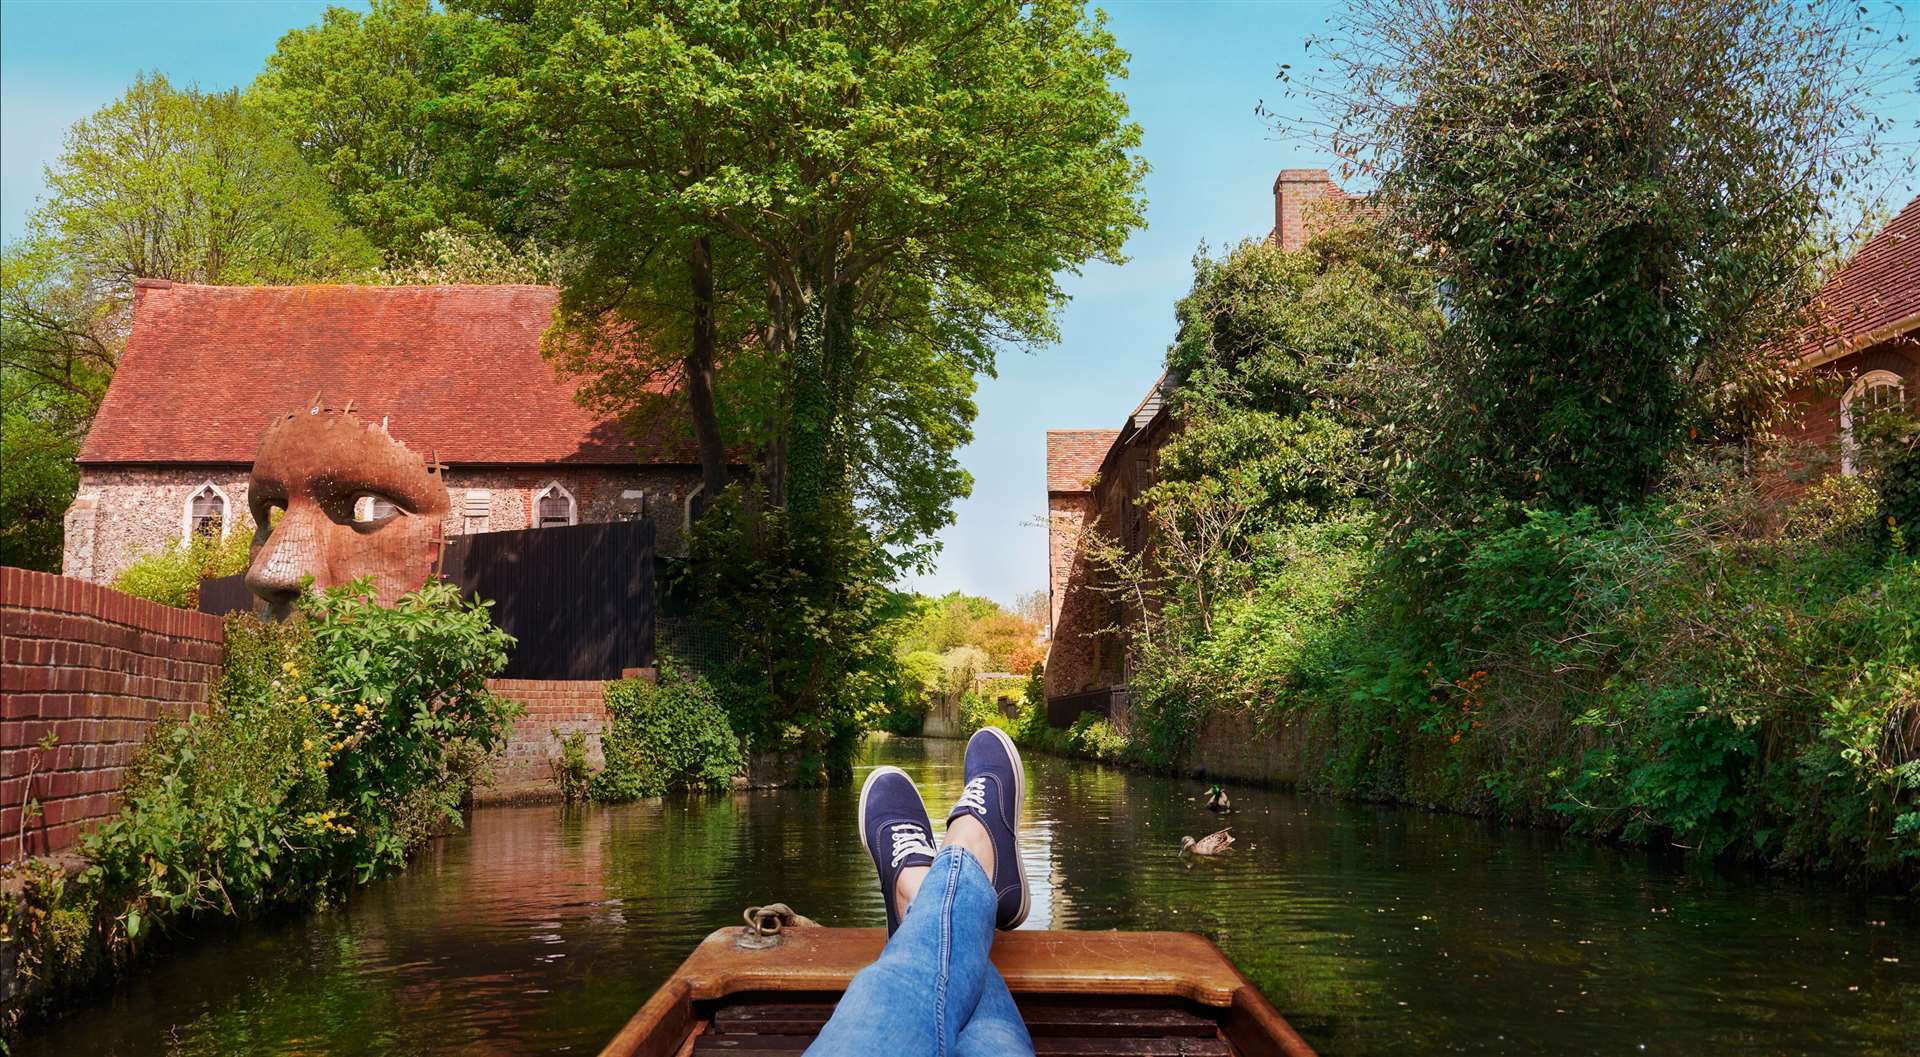 Canterbury punts pictured on a Visit Kent tourism poster